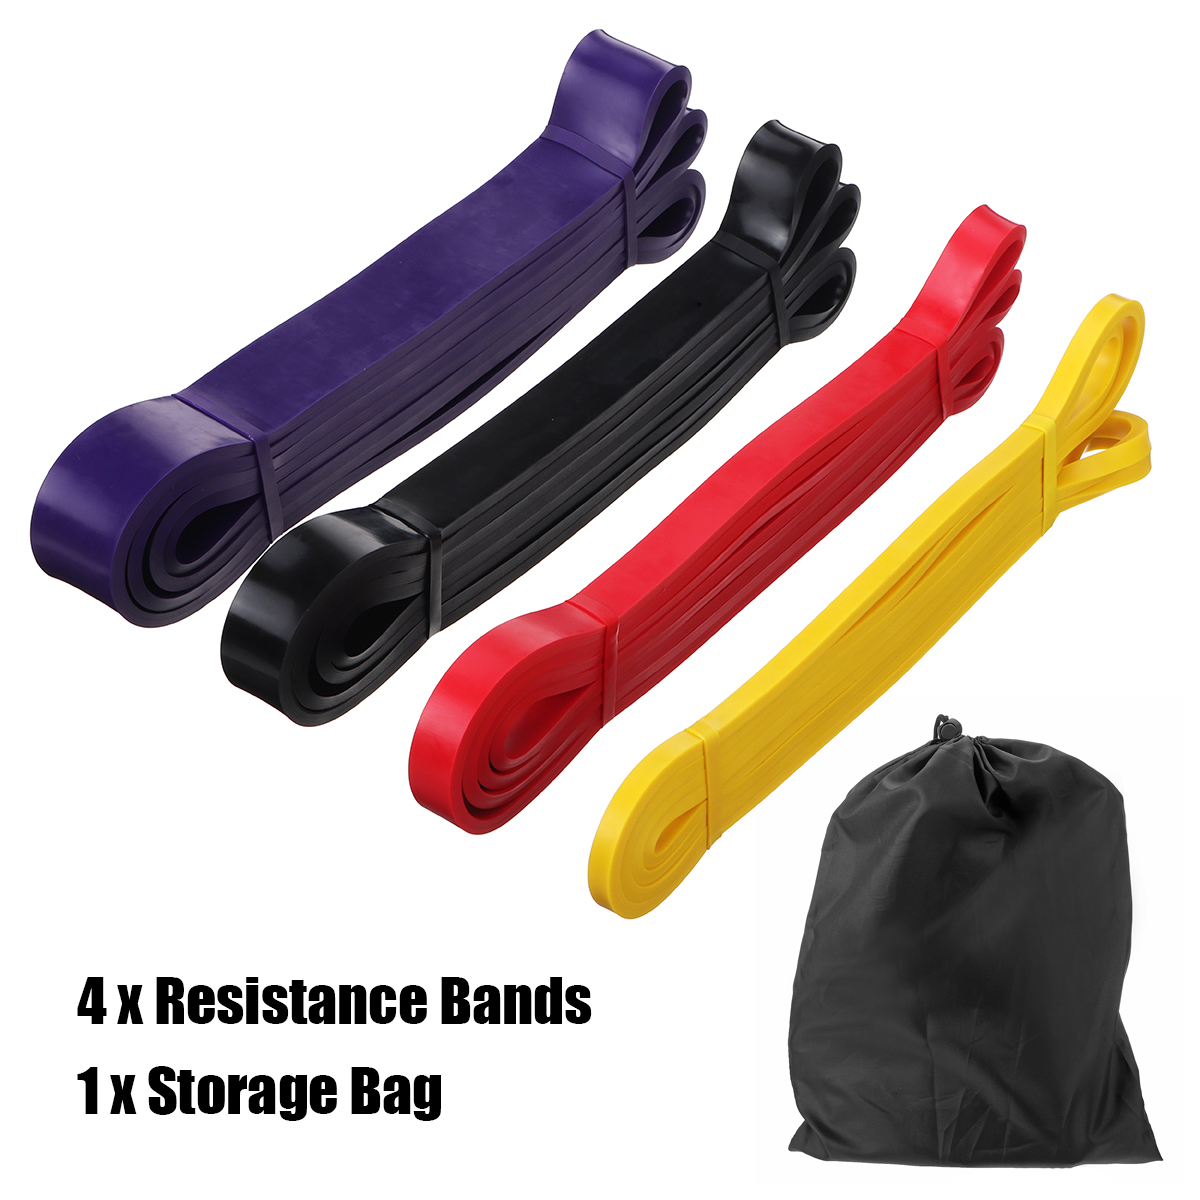 4pcs-8-85lb-2080x45mm-Resistance-Bands-Set-Heavy-Duty-Exercise-Elastic-Band-Workout-Ruber-Loop-Power-1681447-4